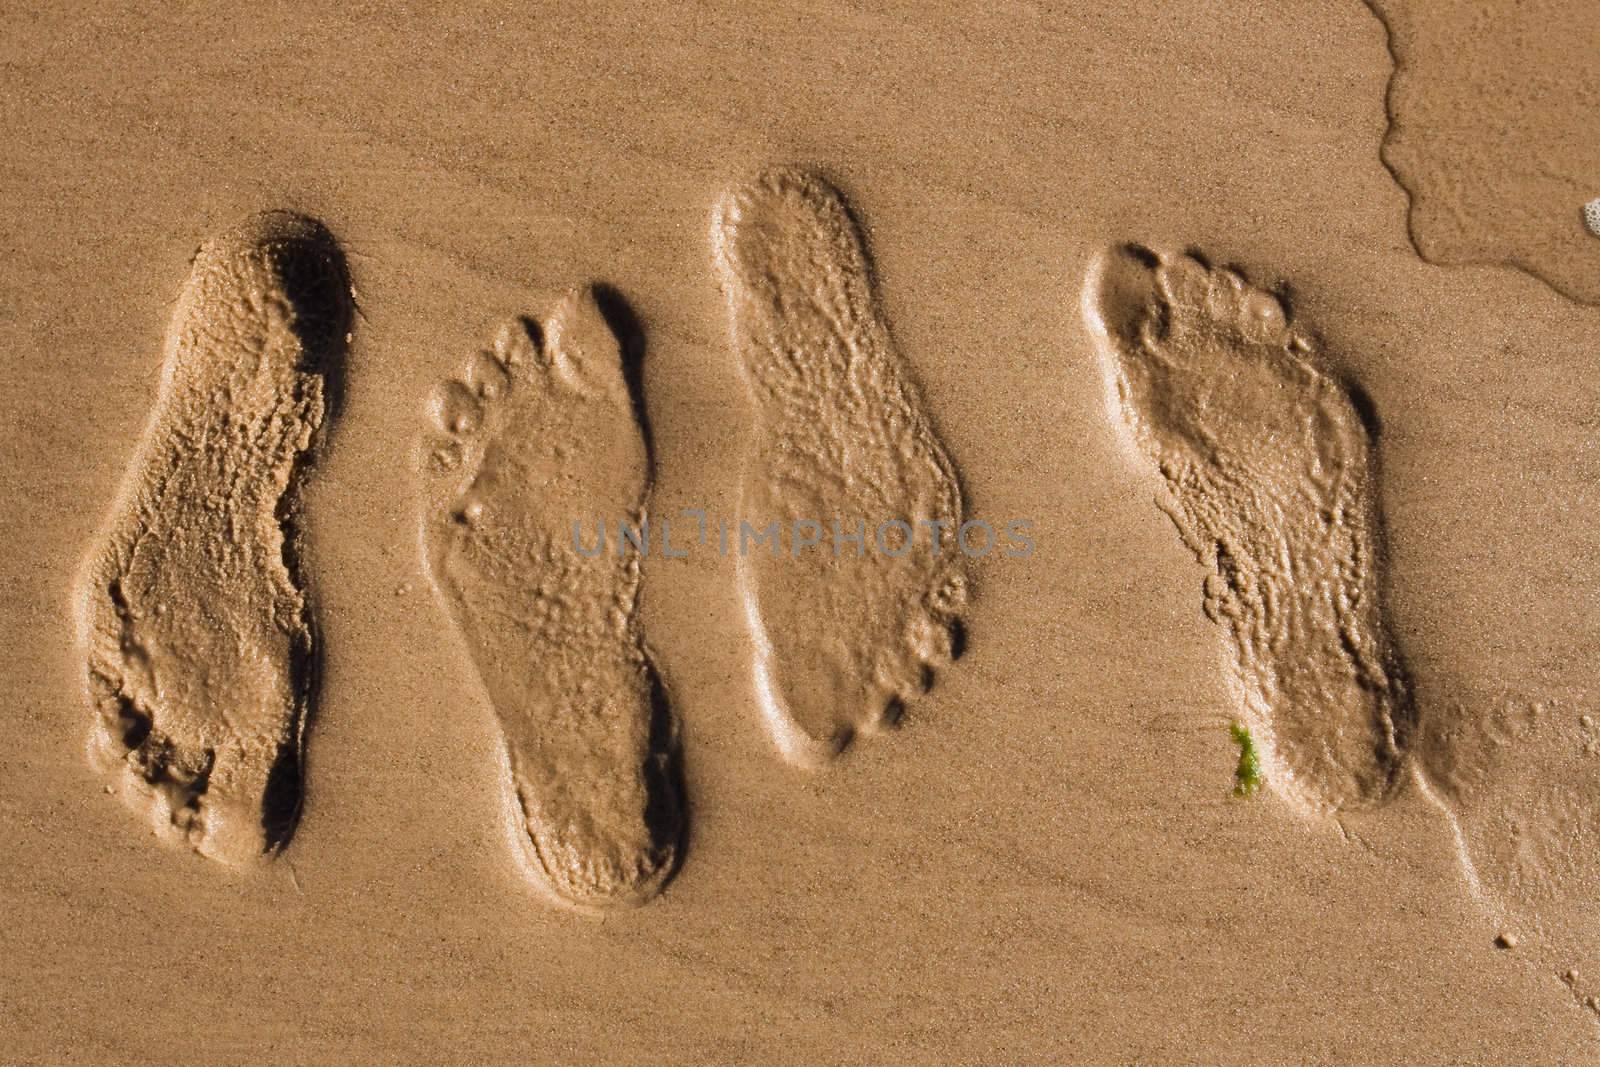 Footprints in wet sand at the Beach